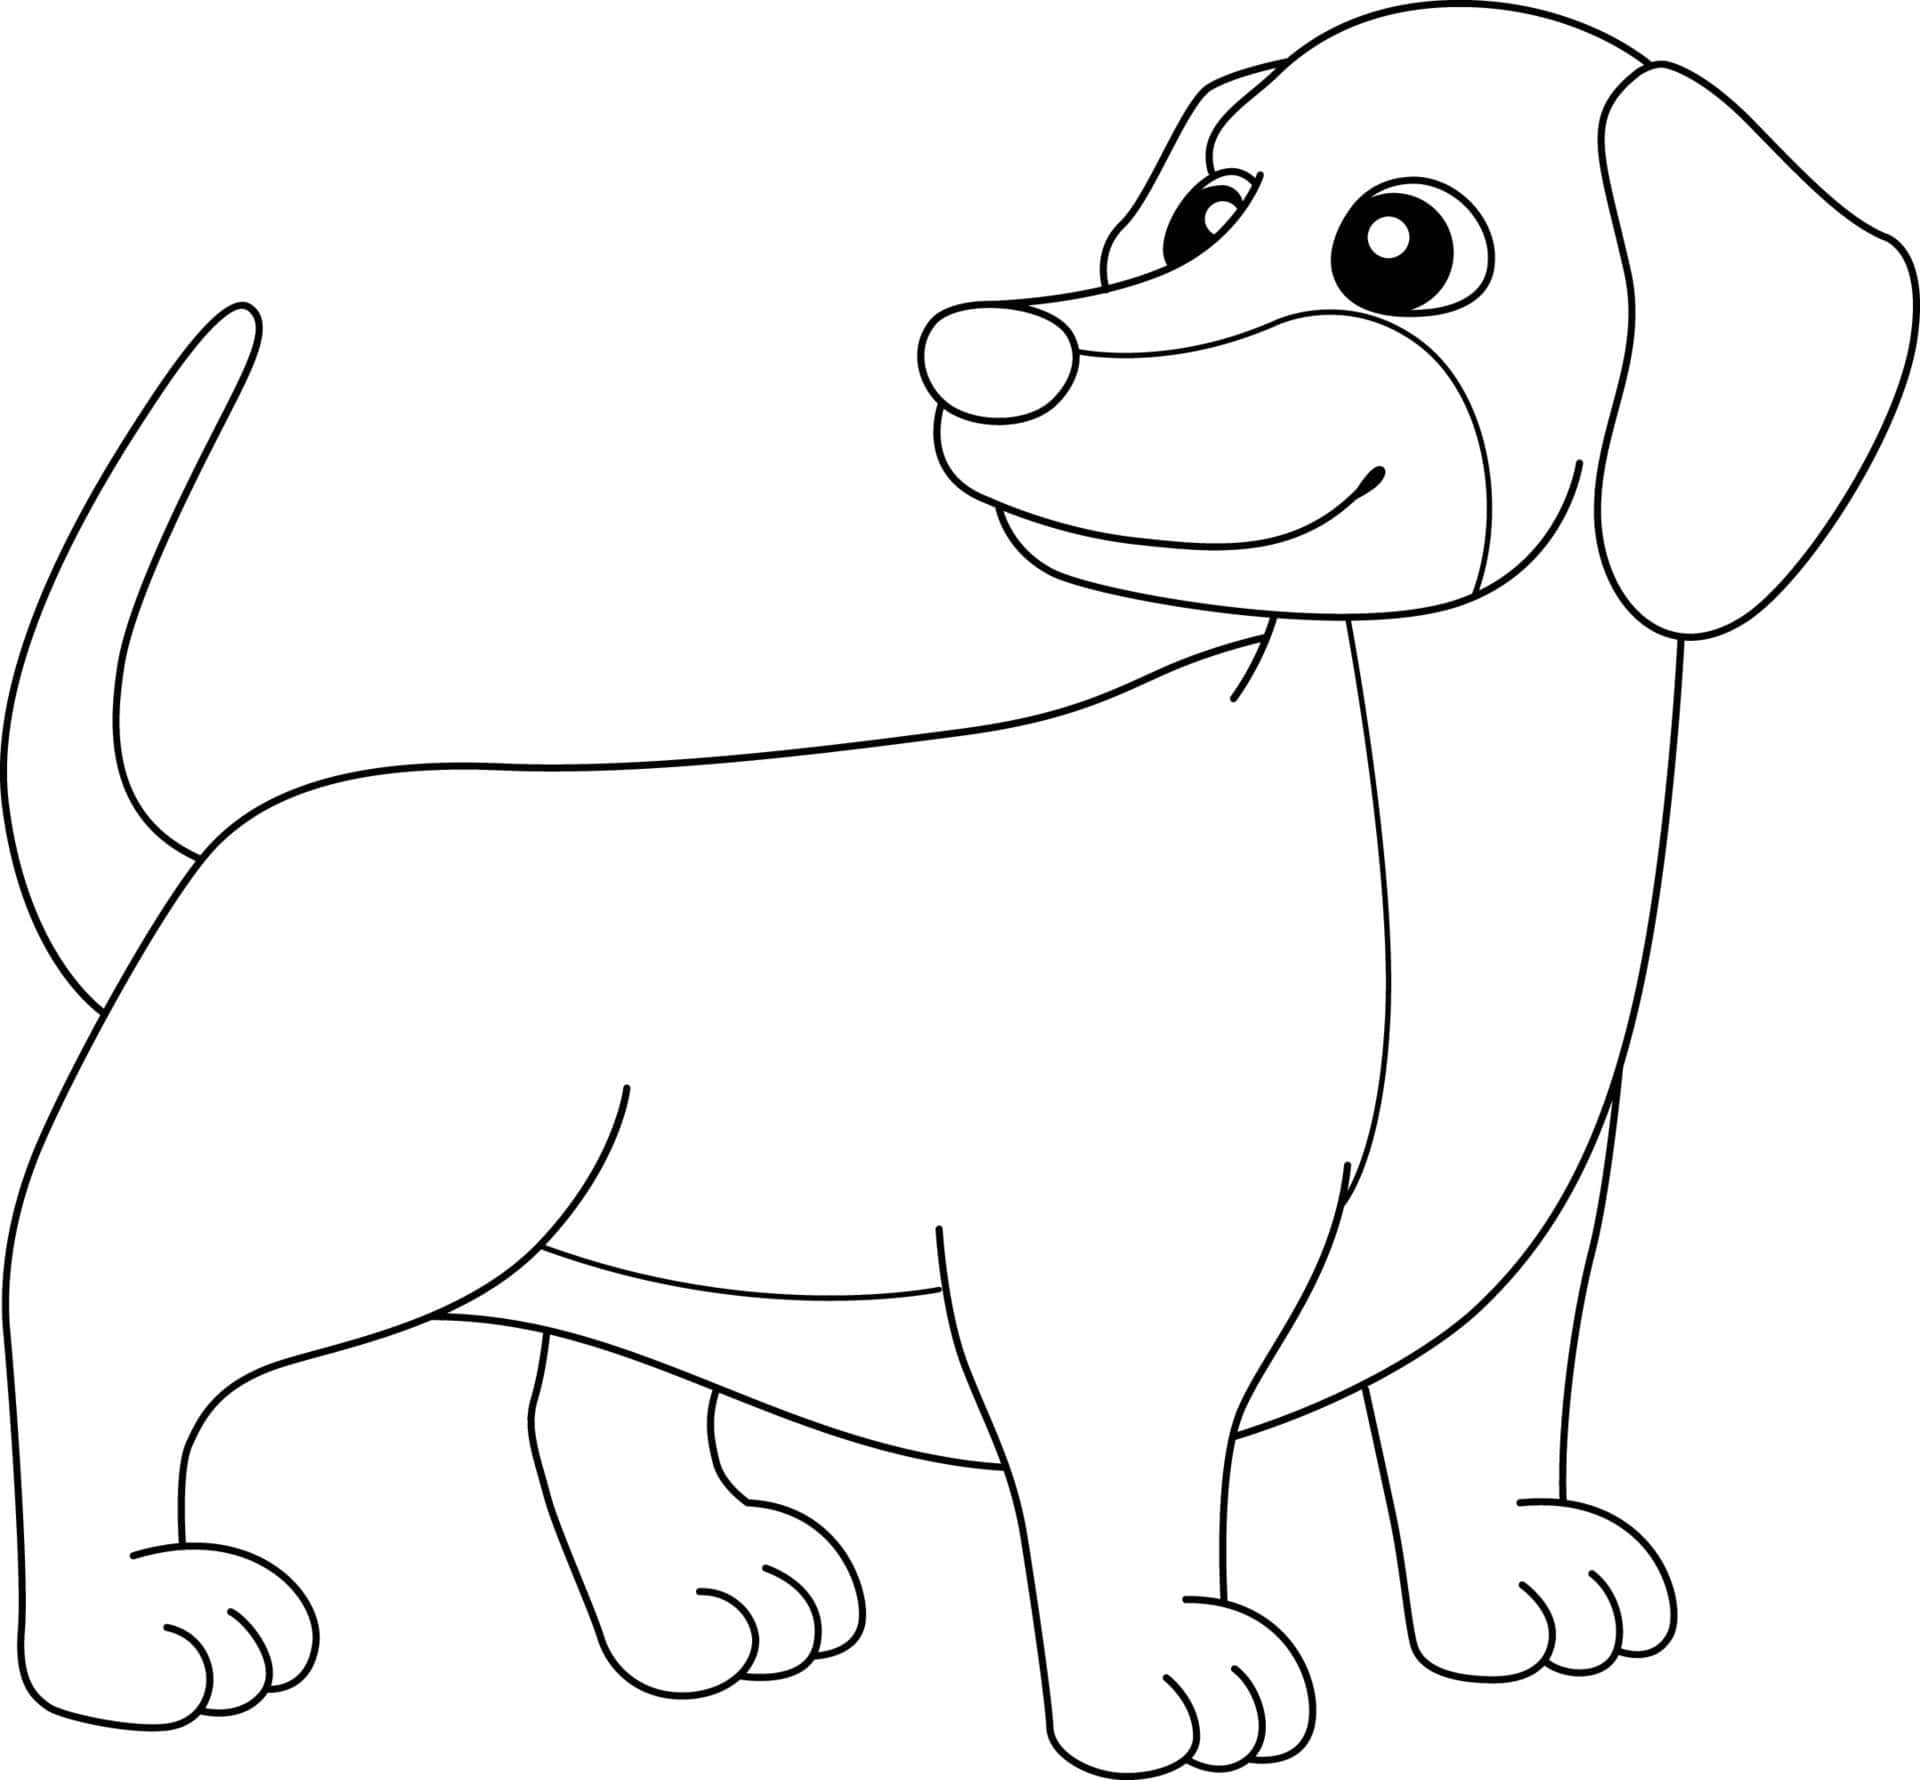 A Dachshund Coloring Page